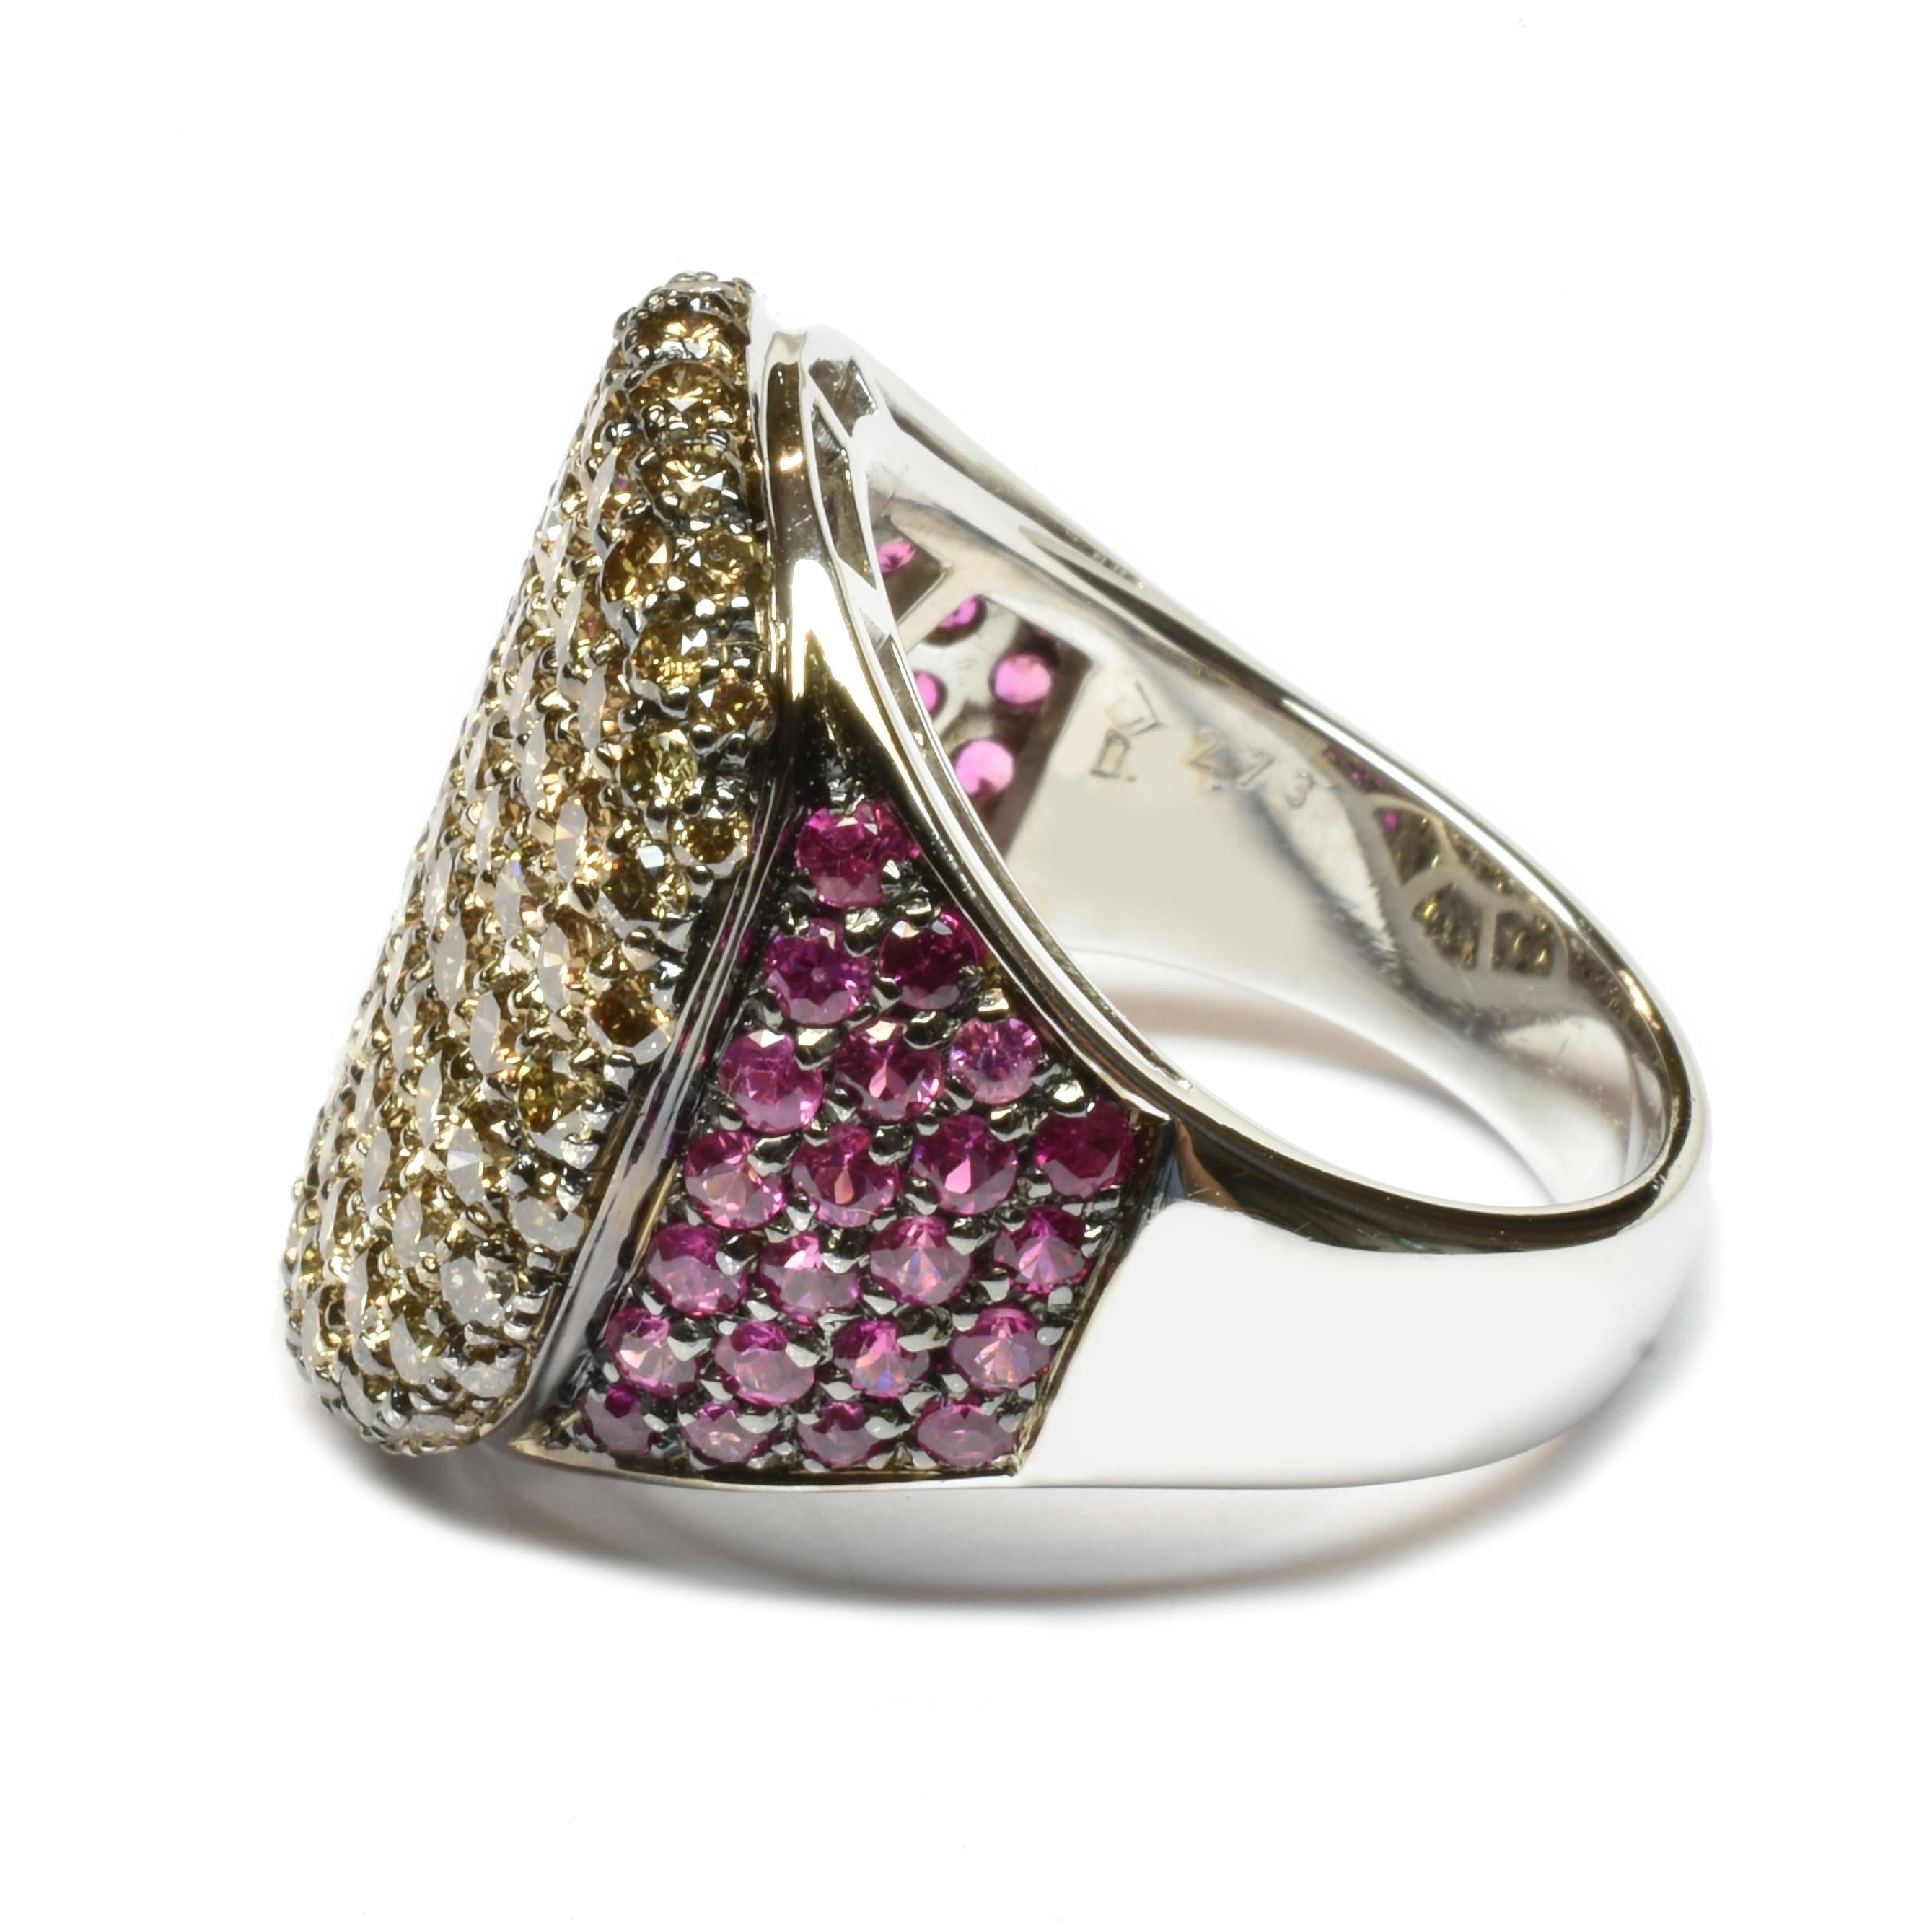 Contemporary Champagne Diamonds and Rubies White Gold Ring Made in Italy For Sale